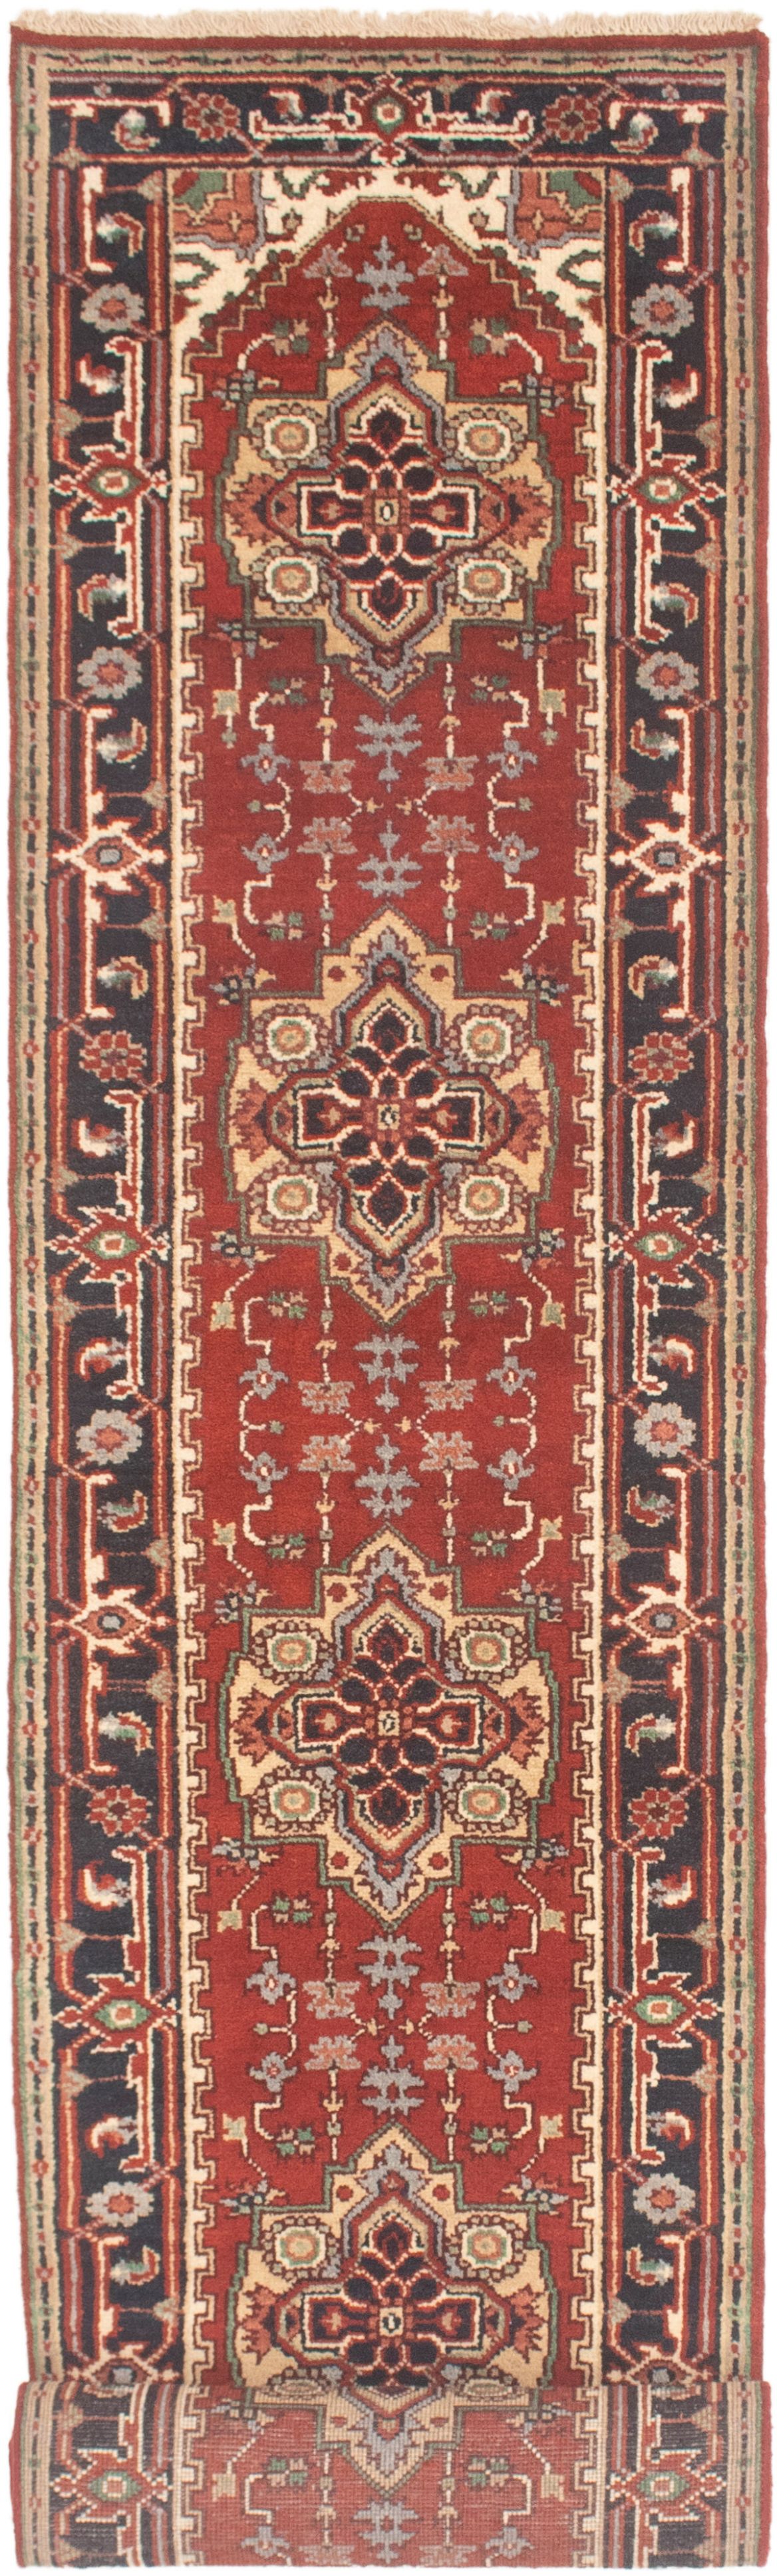 Hand-knotted Serapi Heritage Dark Red Wool Rug 2'5" x 15'10"  Size: 2'5" x 15'10"  